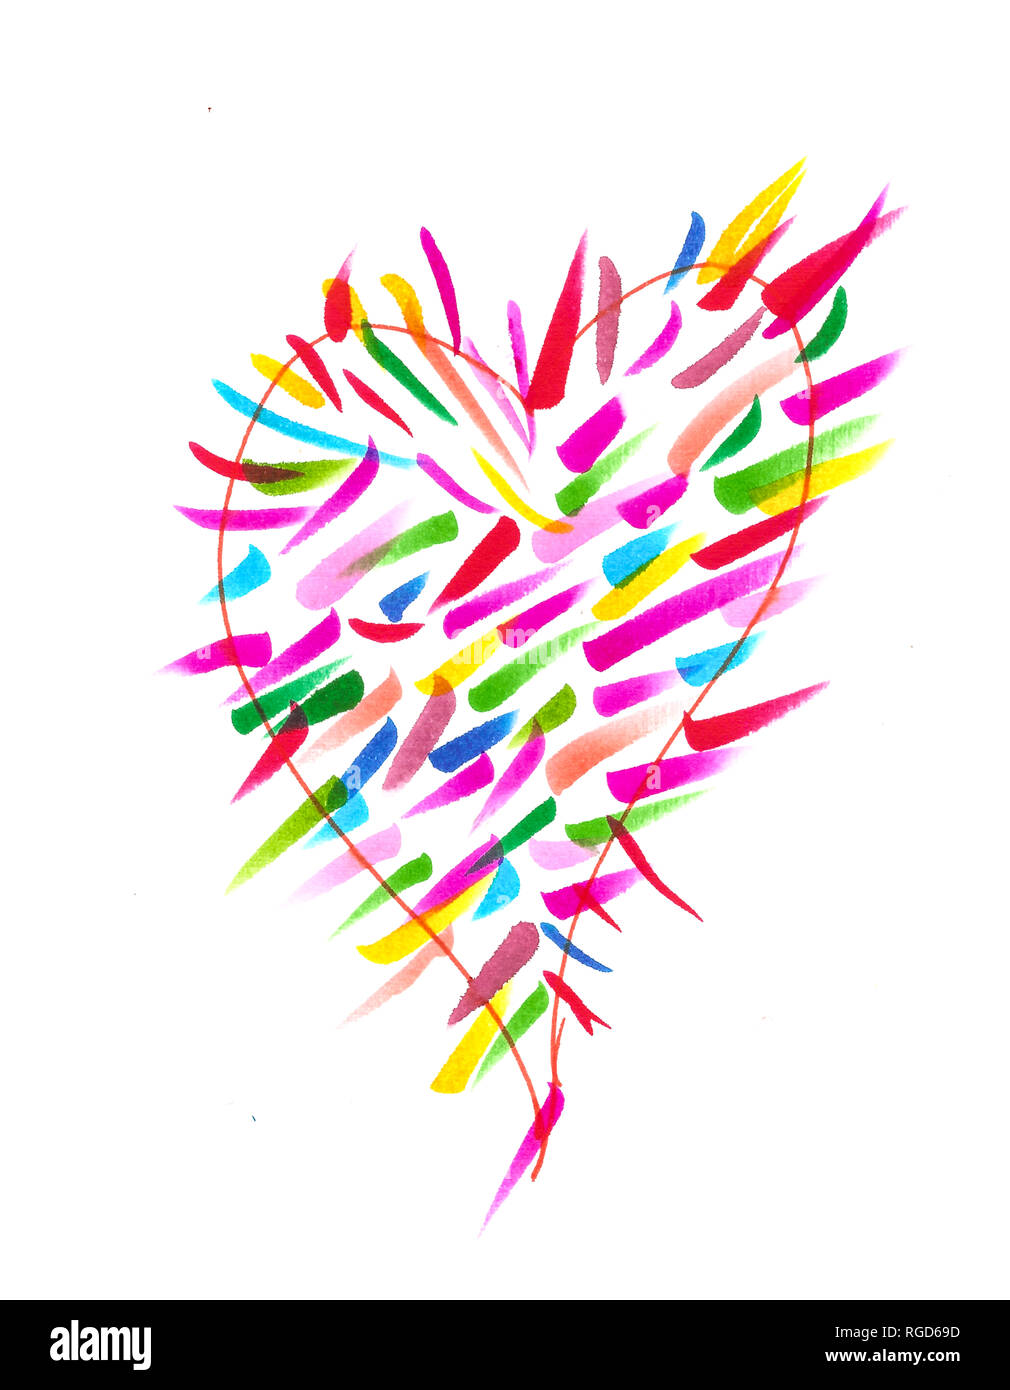 handmade colorful pen drawing heart Stock Photo